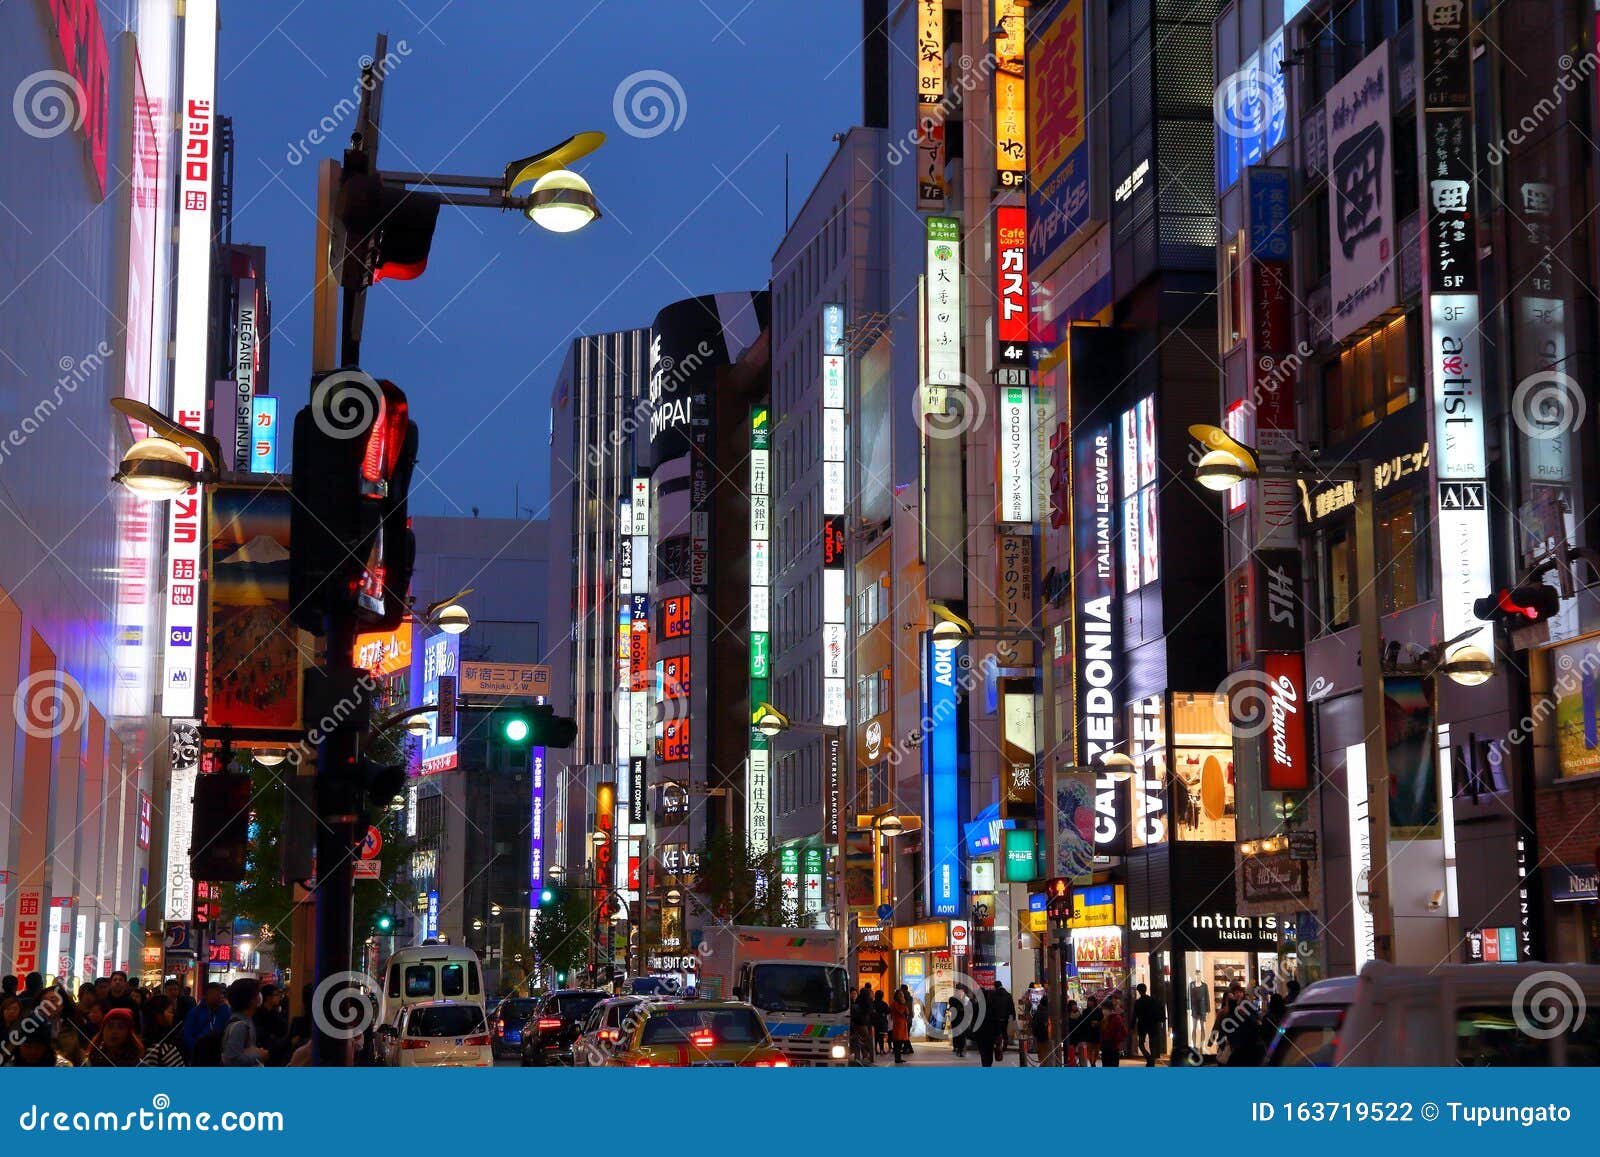 Tokyo Shopping Street Editorial Photography Image Of Nightlife 163719522